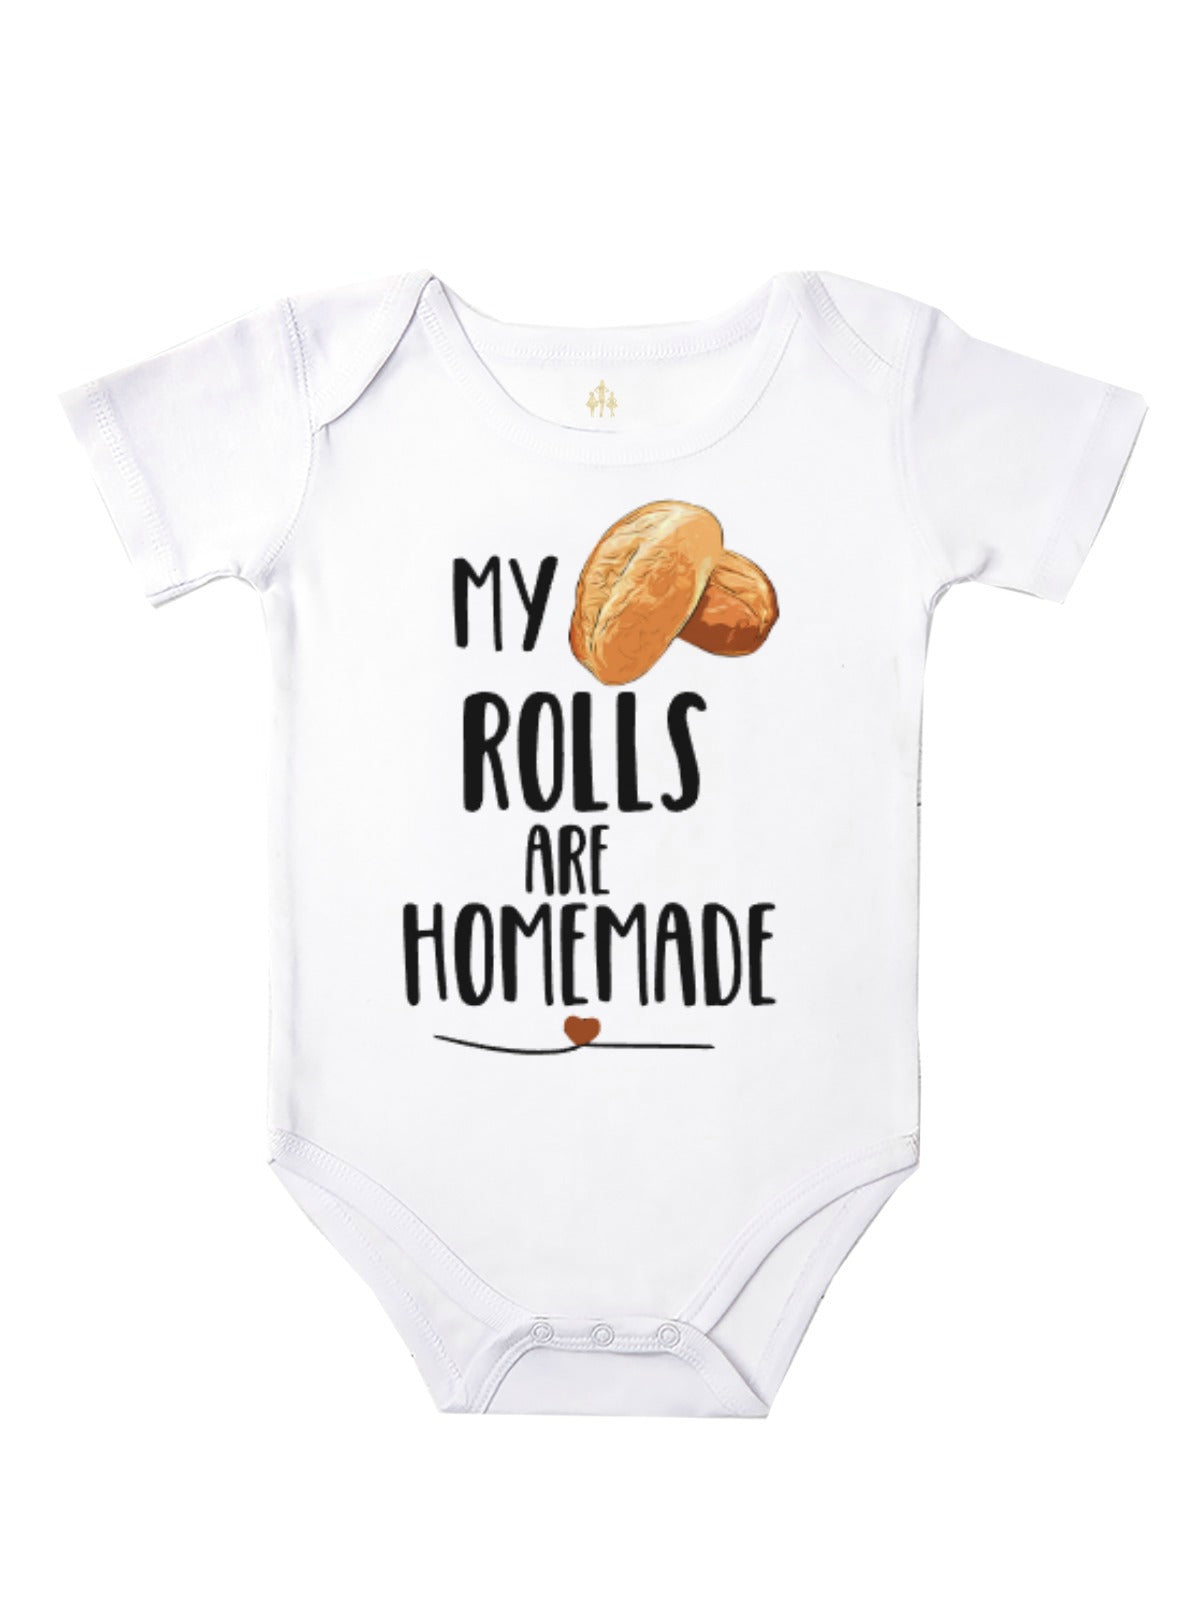 My Rolls Are Homemade Baby Bodysuit and T-shirt